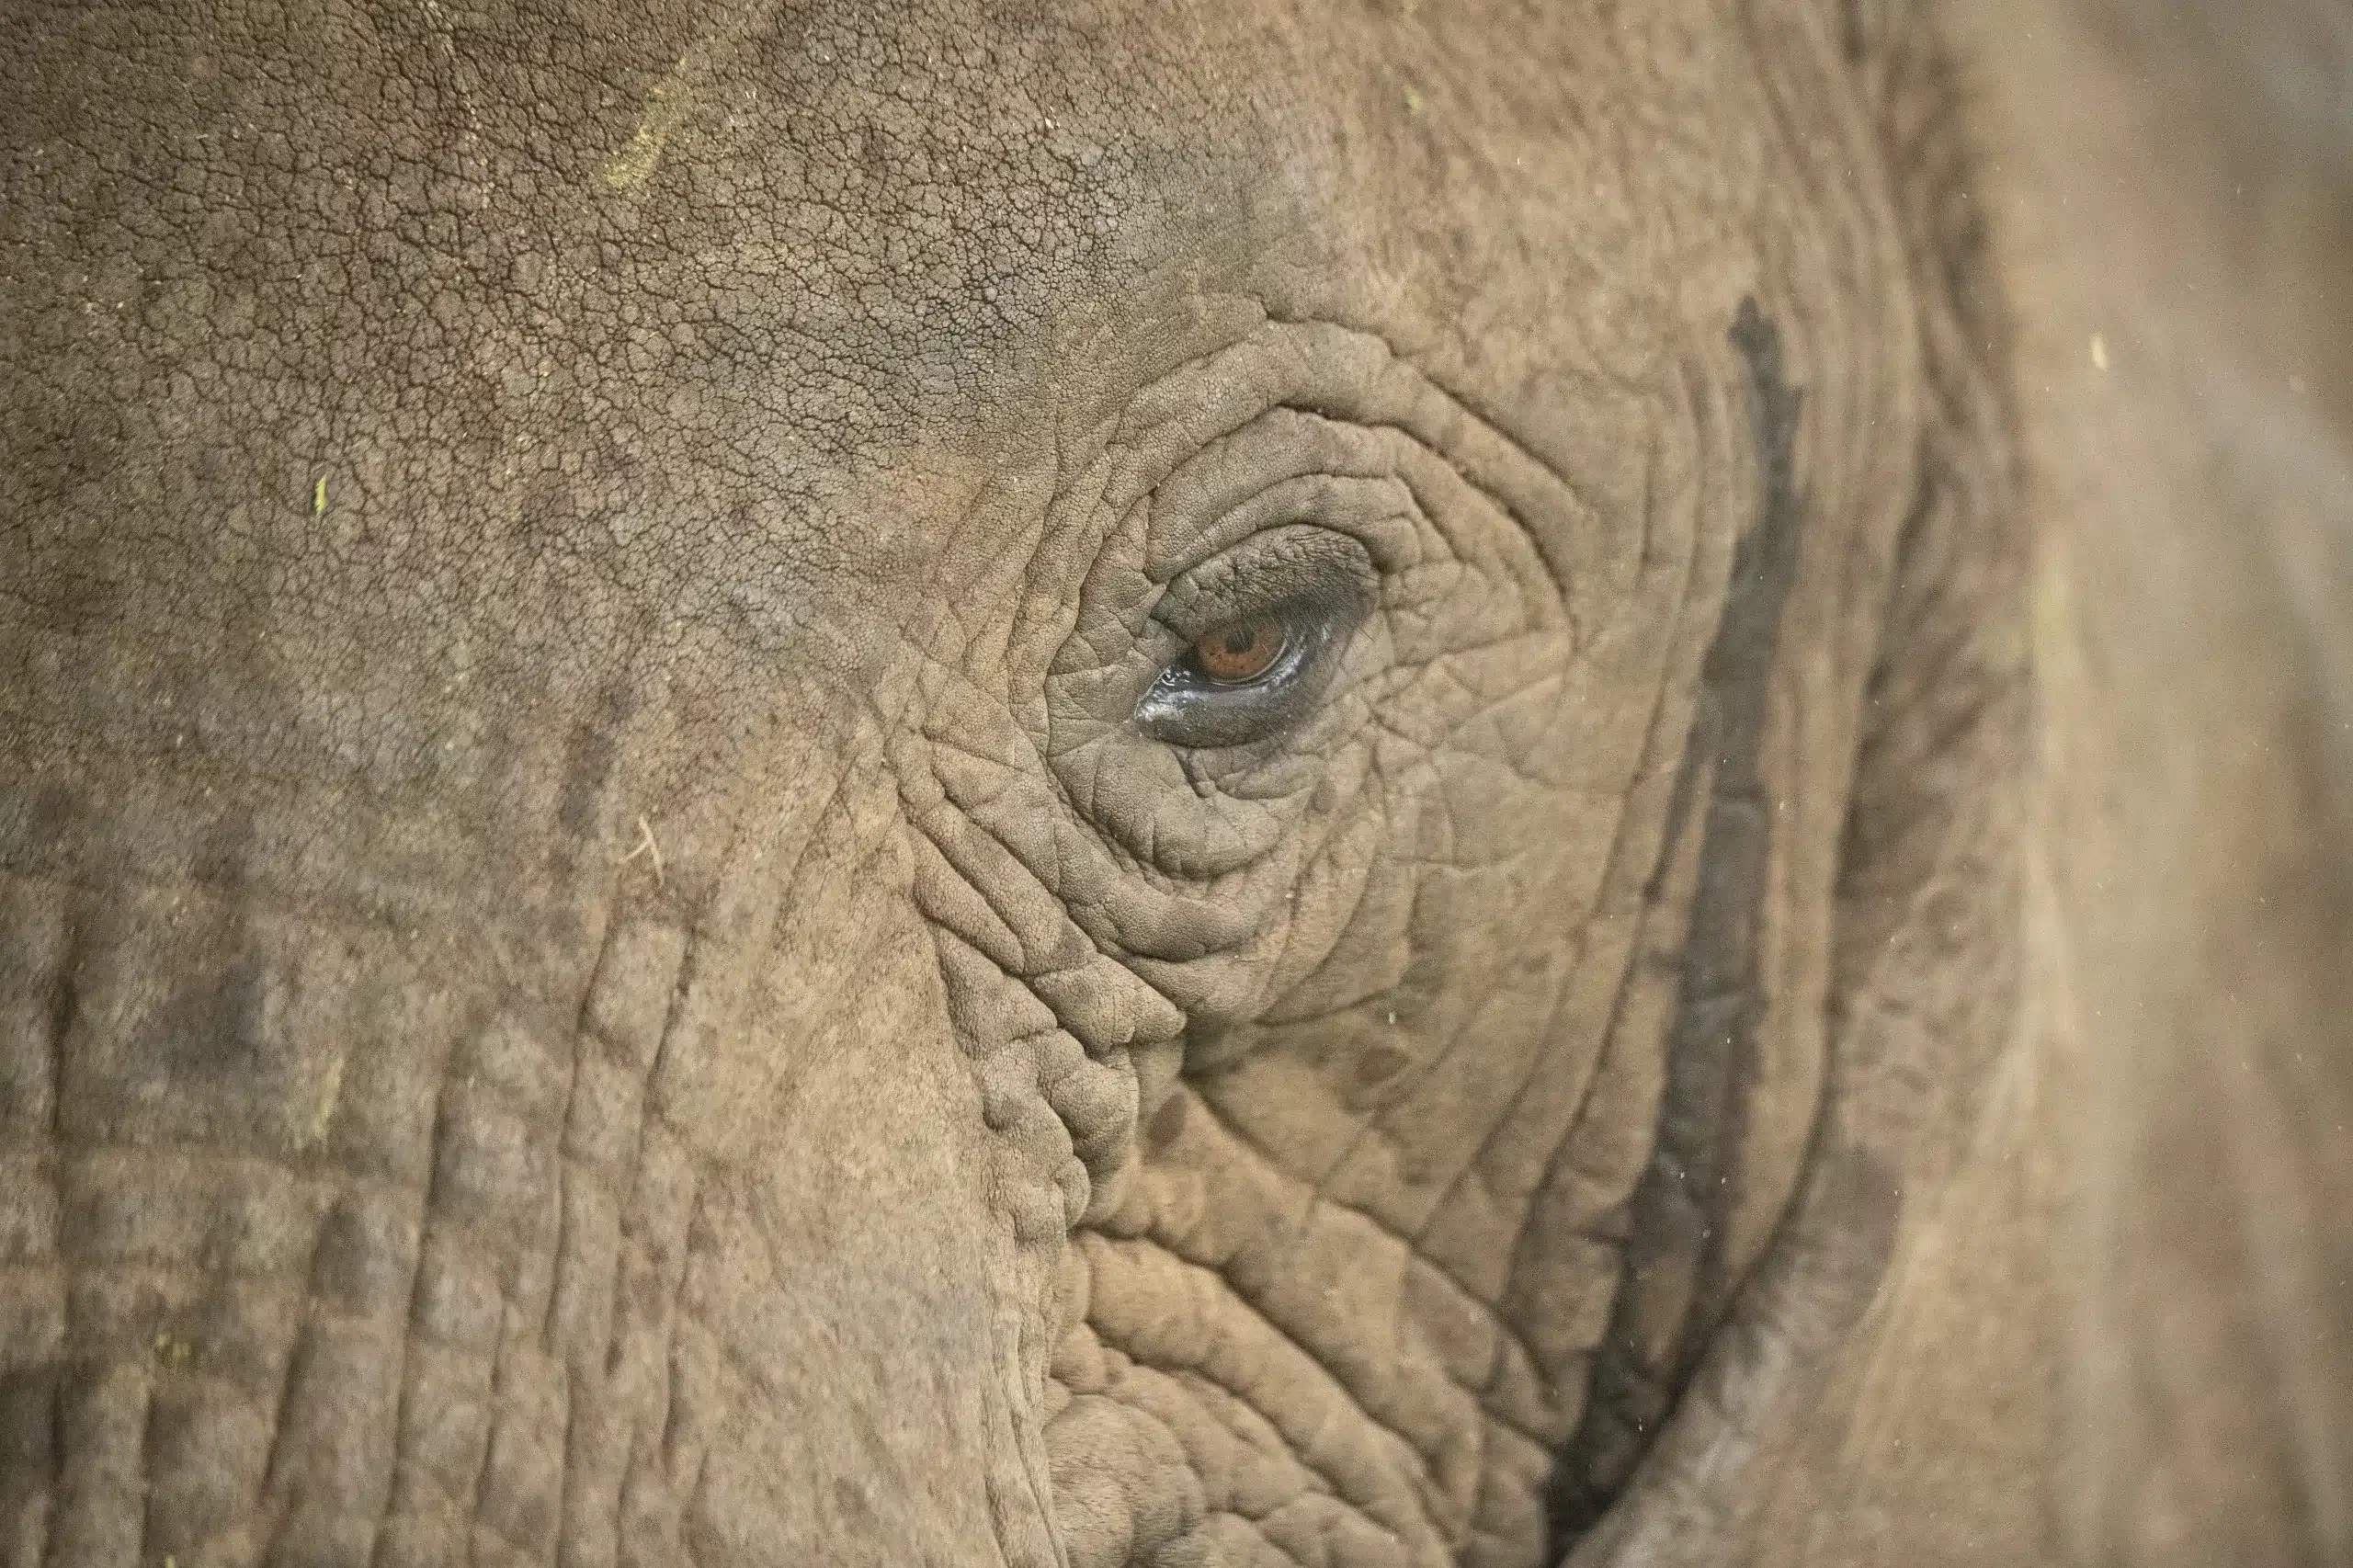 Incredible close-up of an elephant in Tanzania, showcasing the beauty of African wildlife